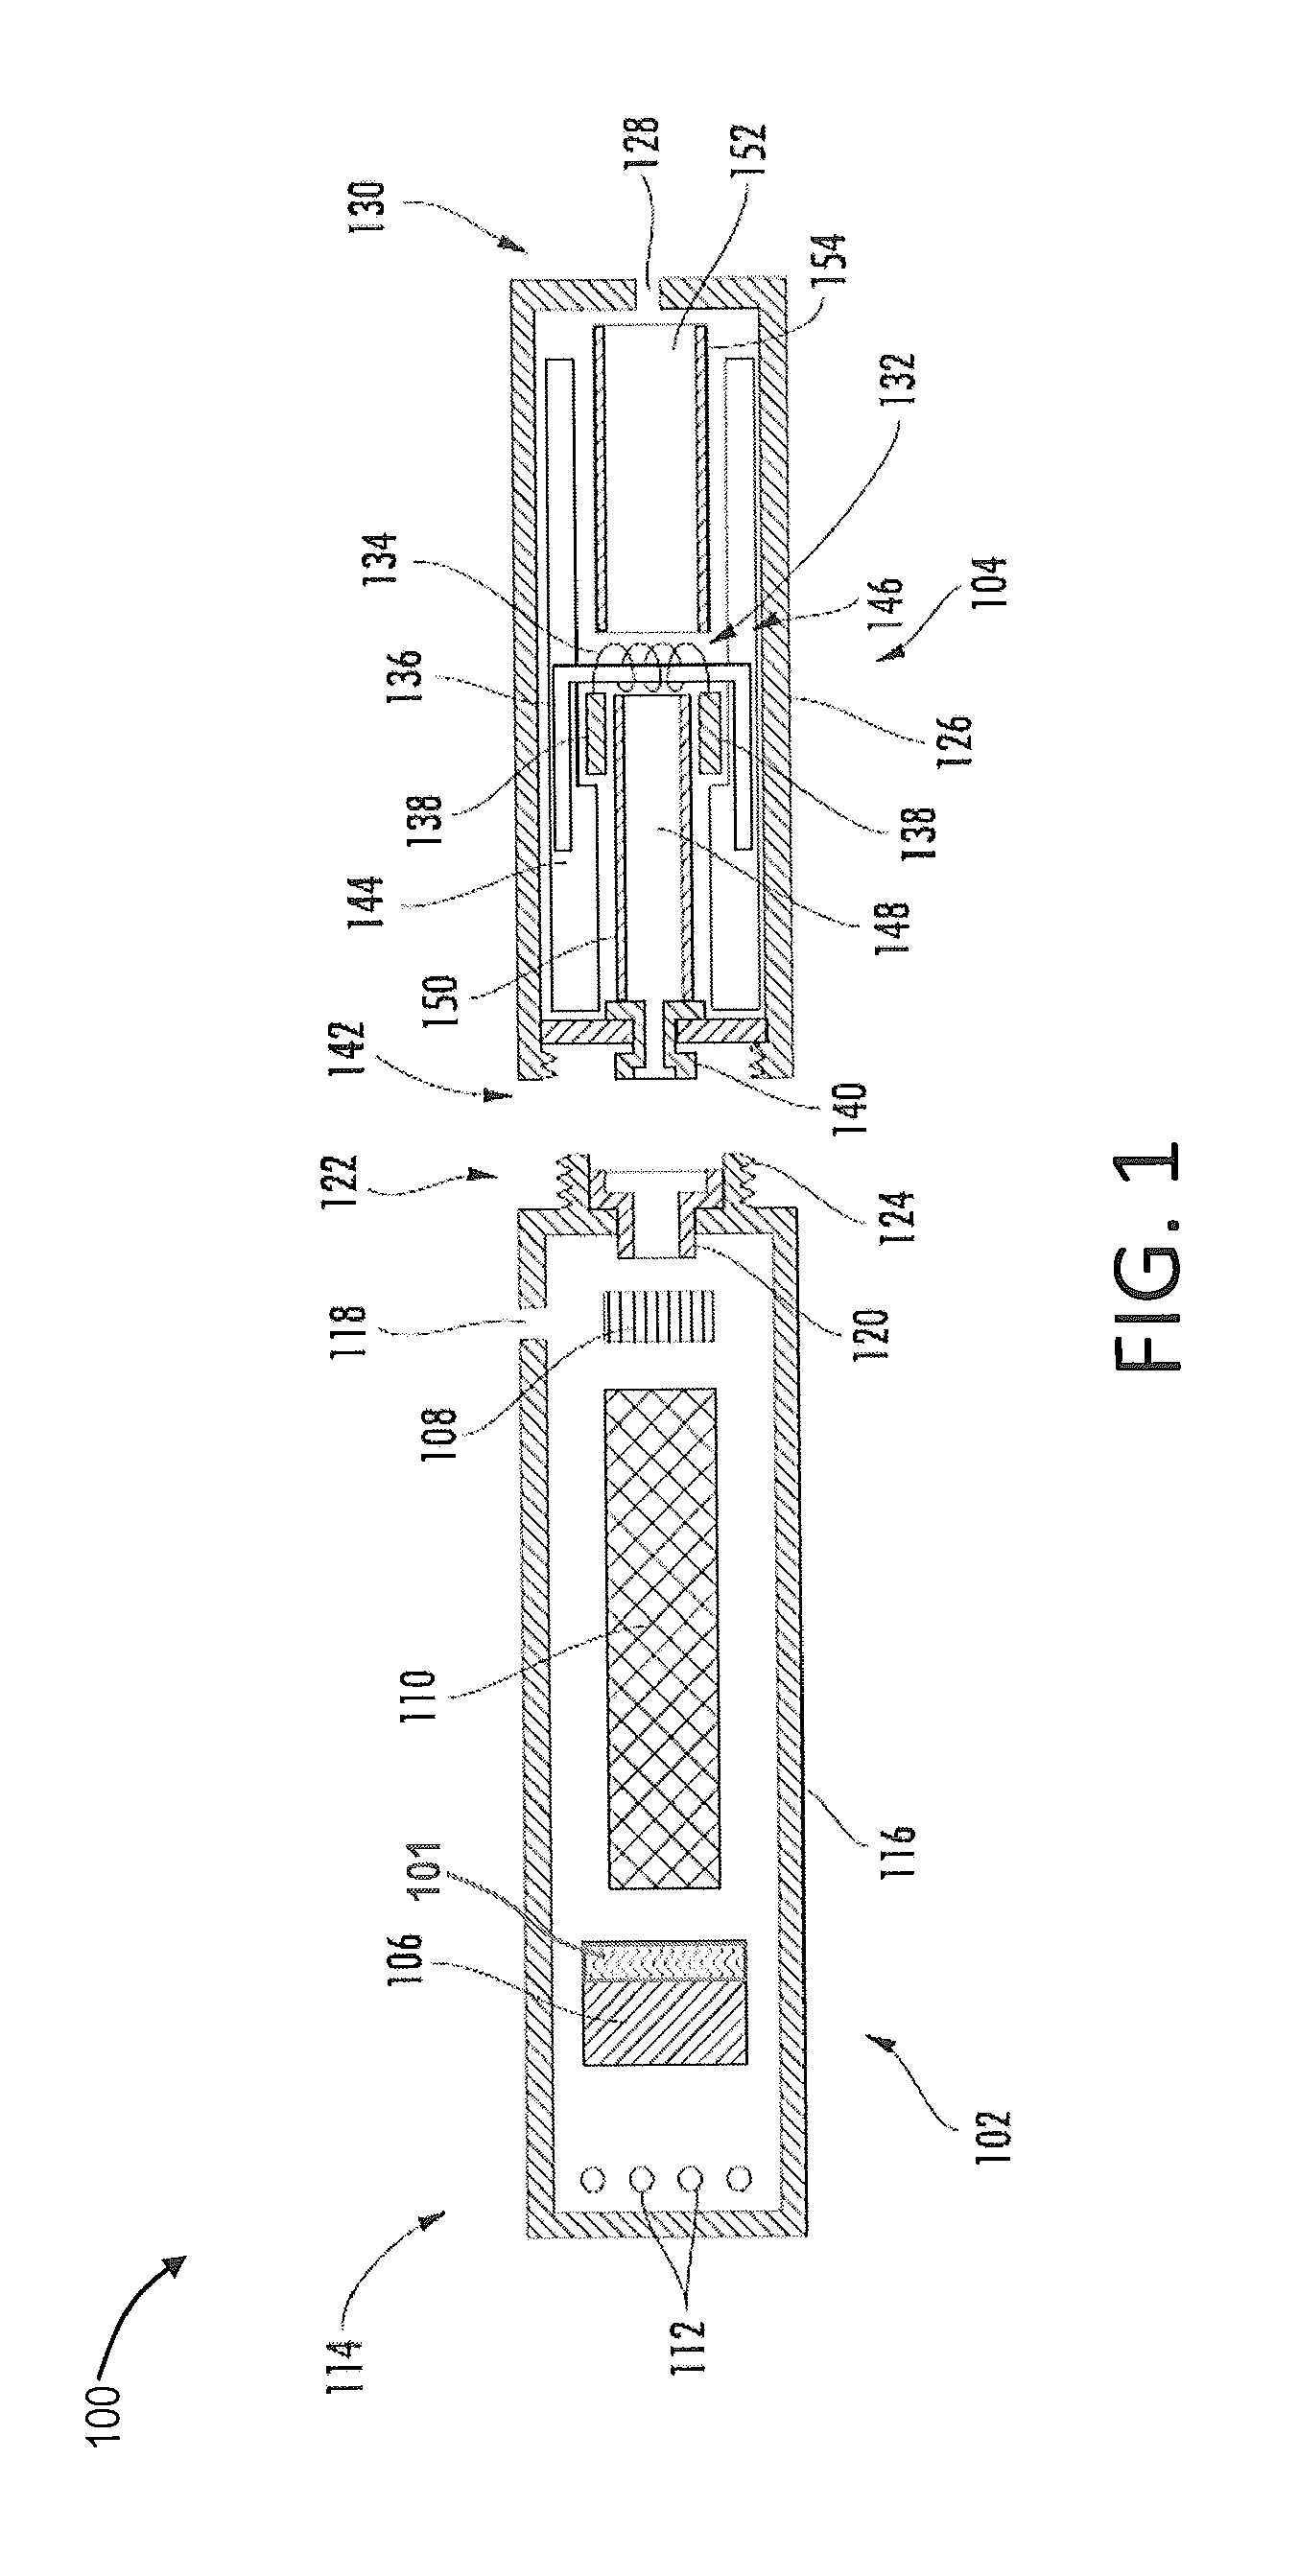 Sensor for an aerosol delivery device